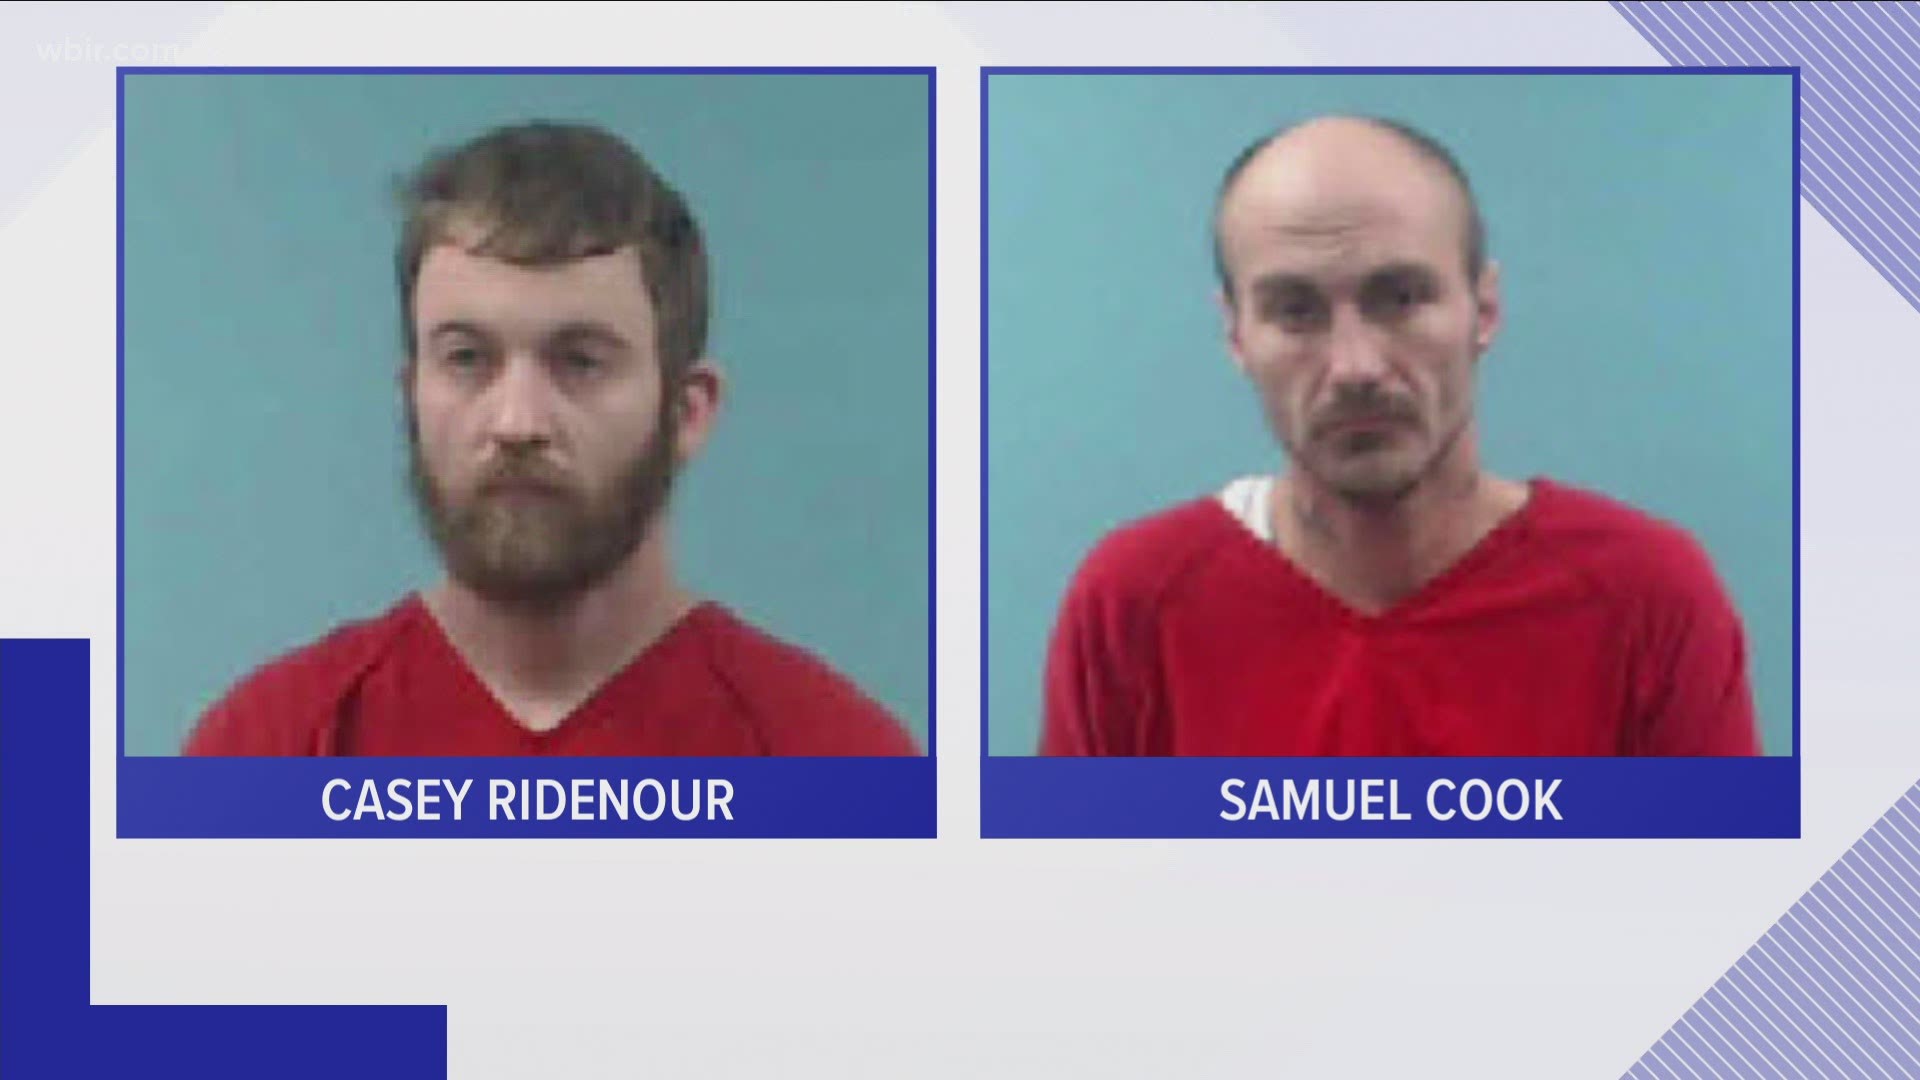 The men are charged in the killing of Aaron Brown.